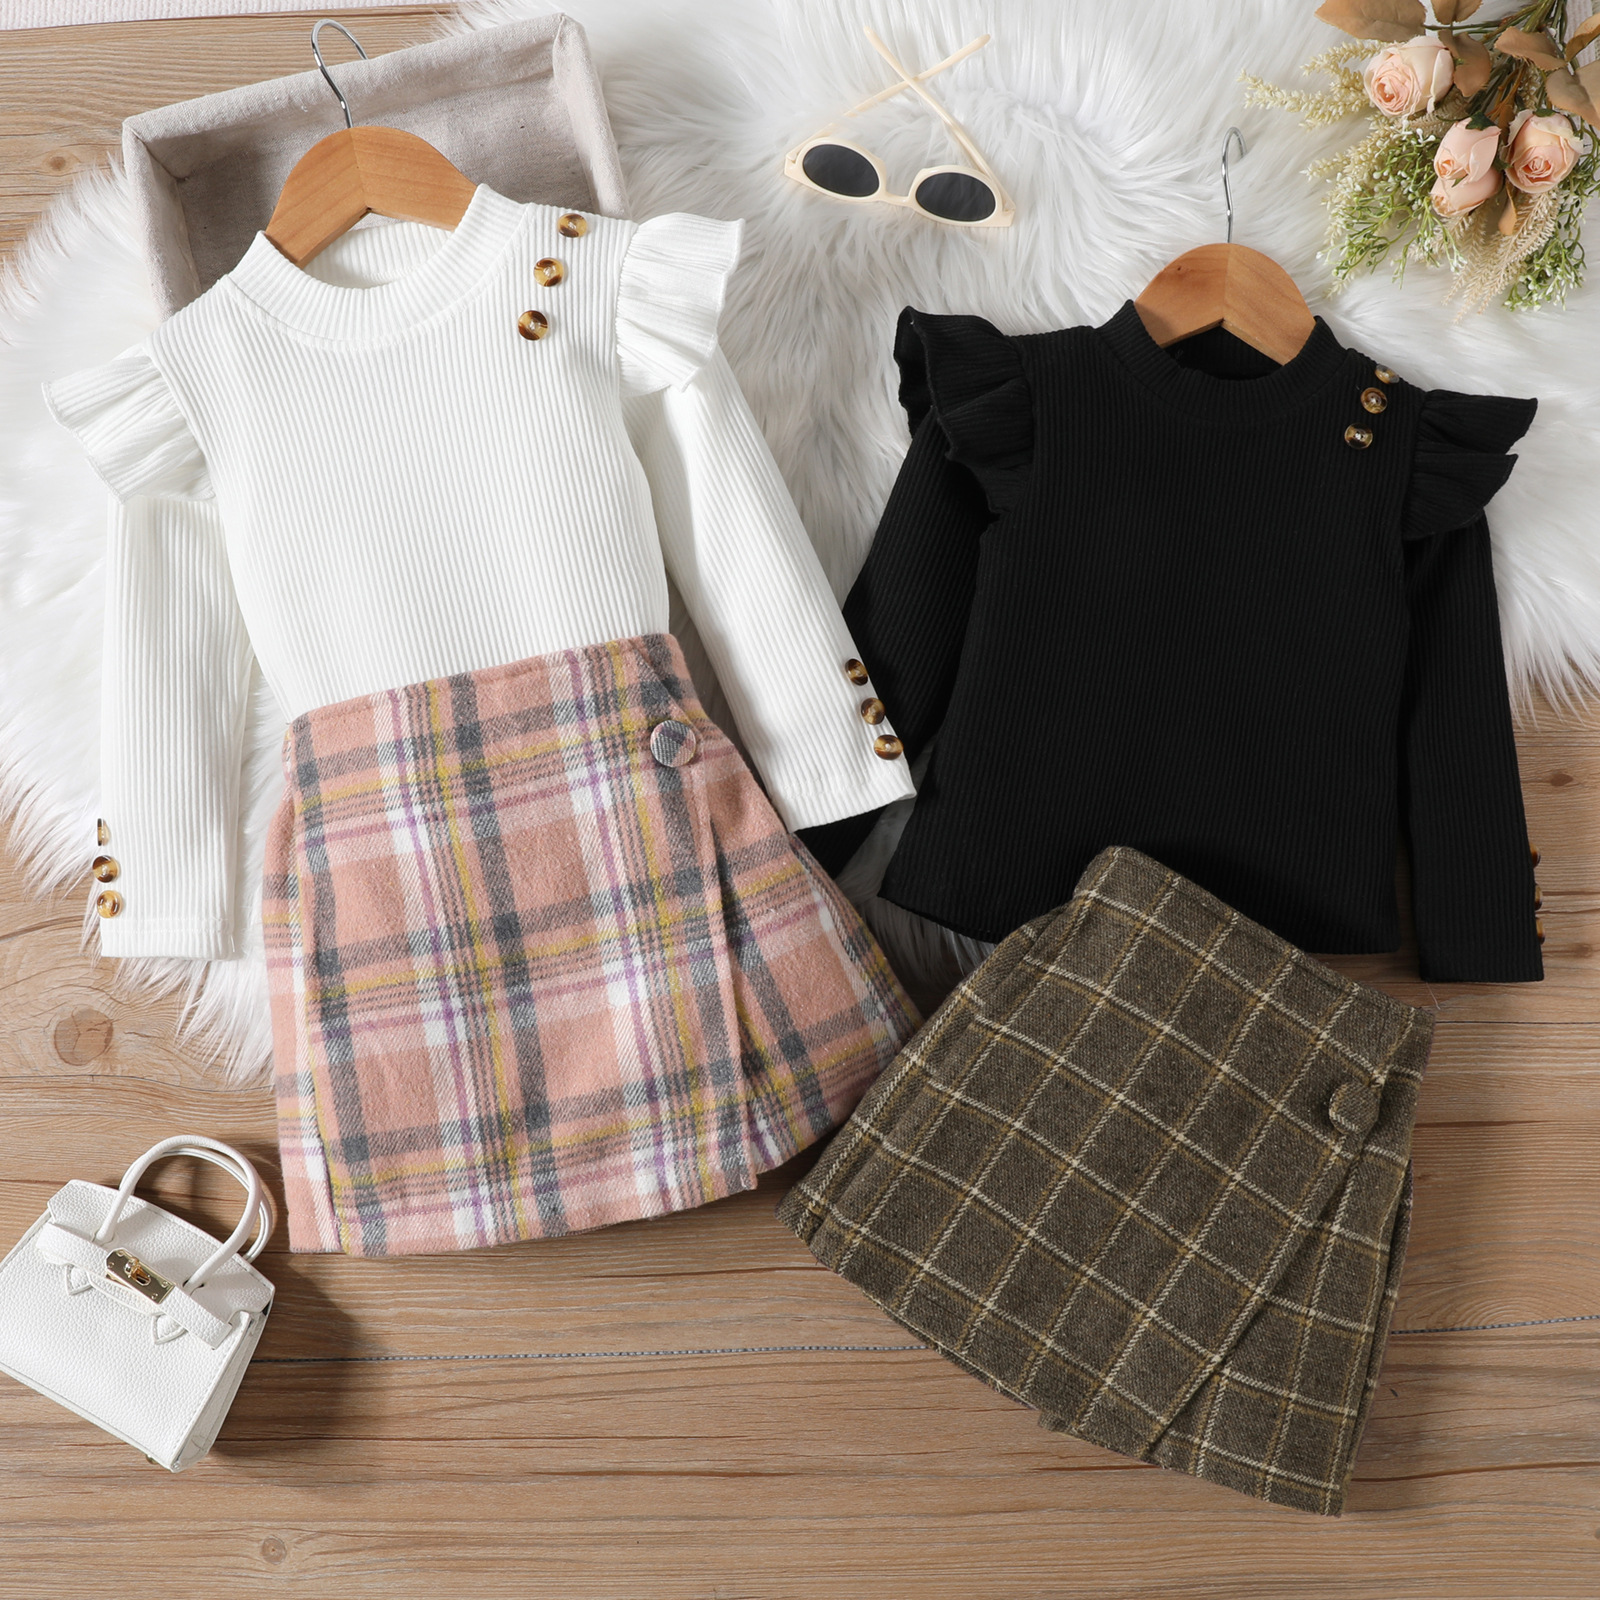 Wholesale preppy style plaid button cotton girls clothing sets -  Nihaojewelry